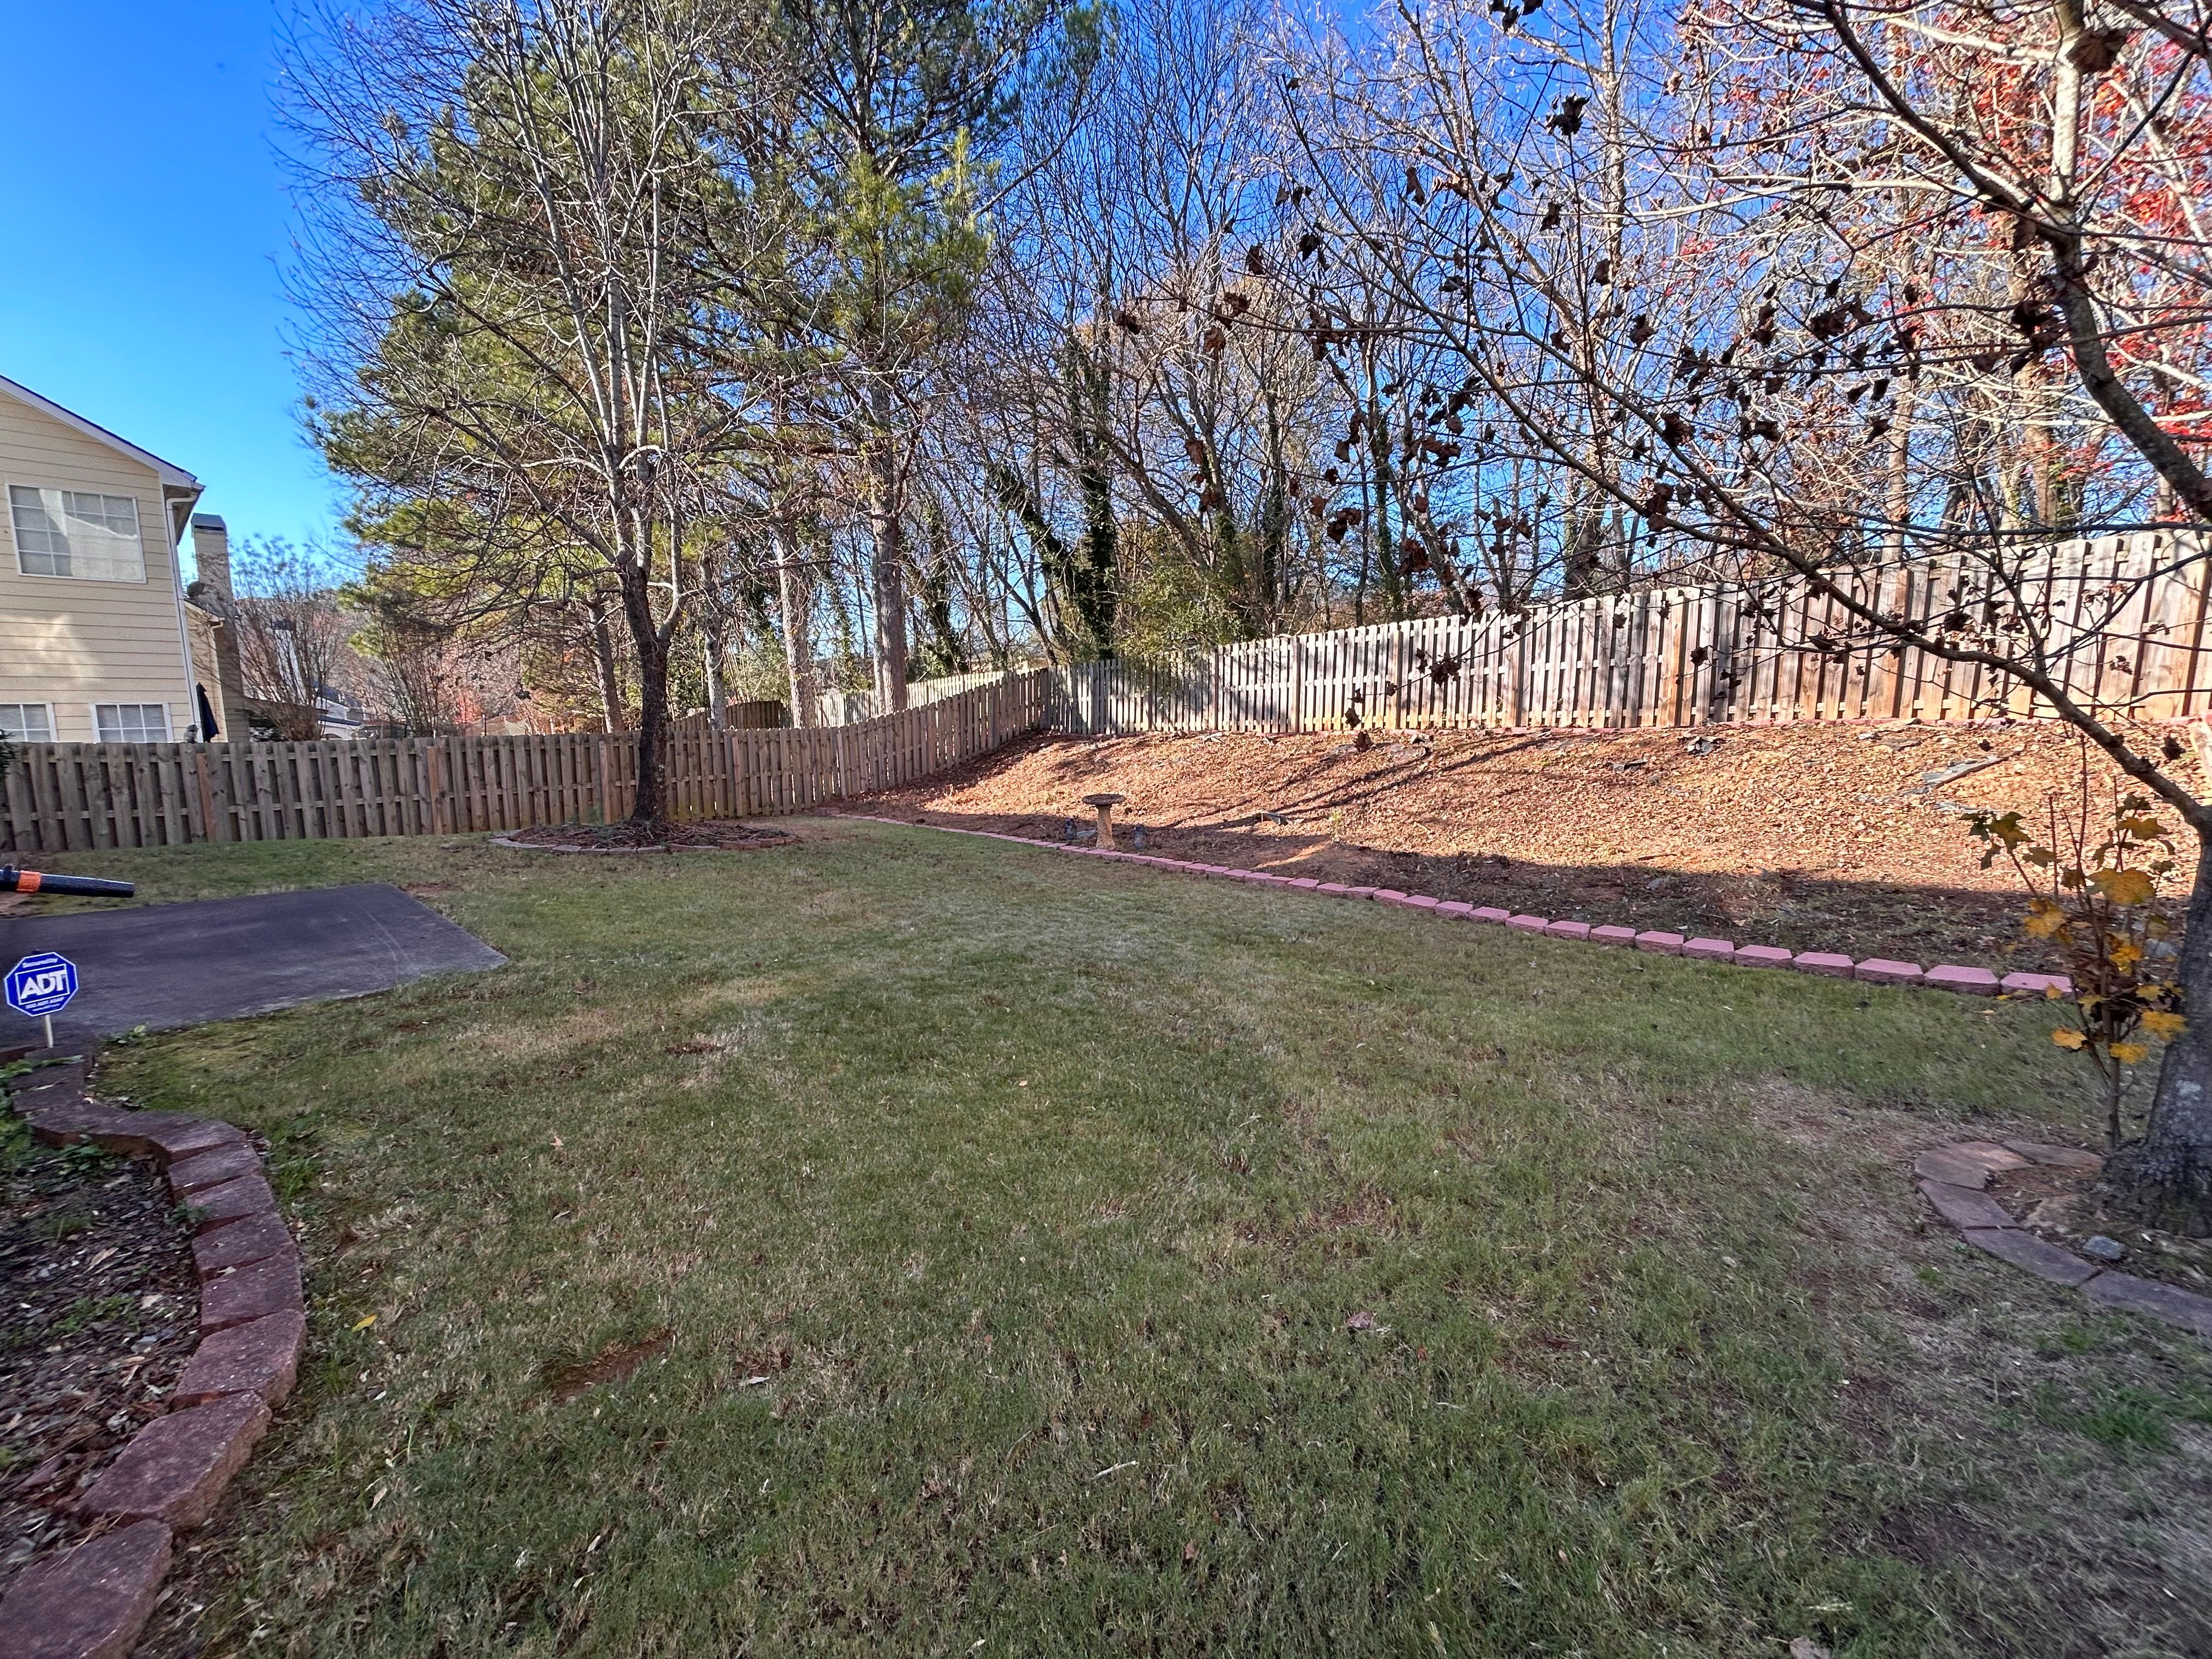 All Photos for Two Brothers Landscaping in Atlanta, Georgia